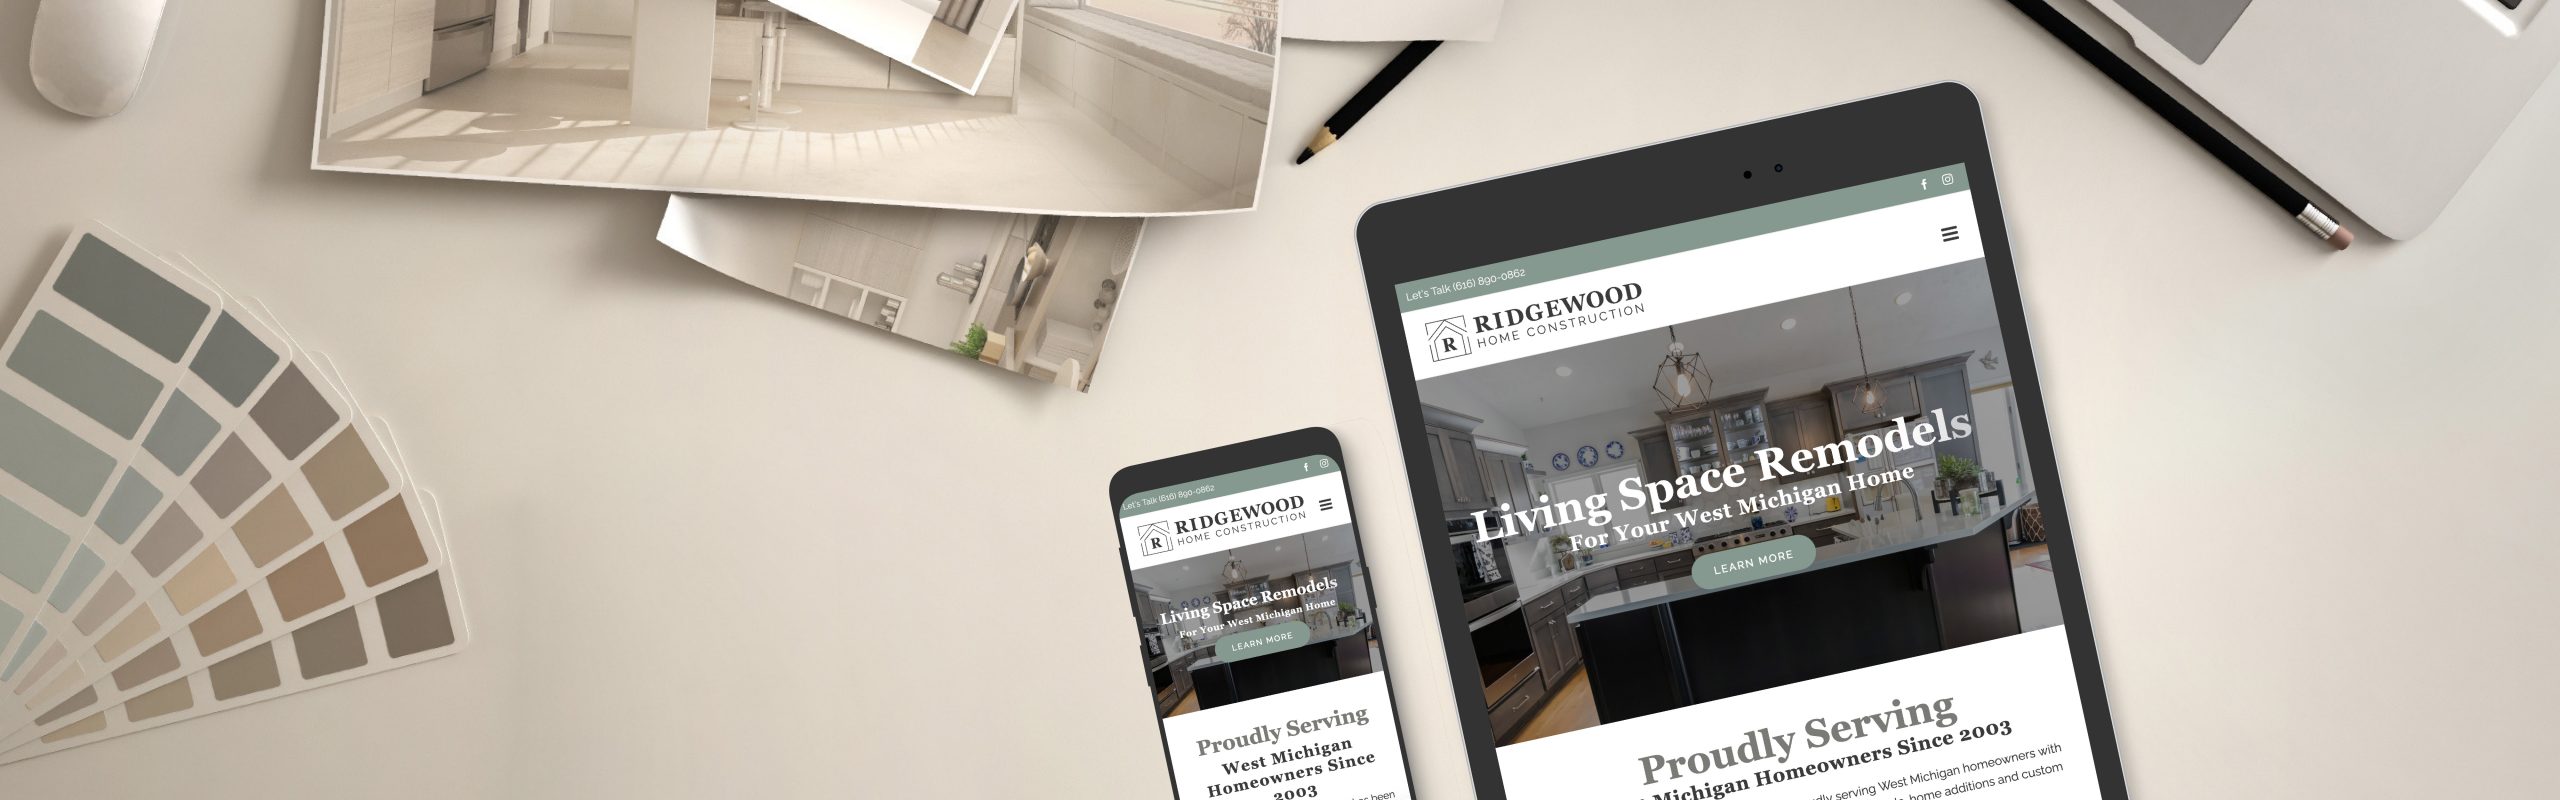 A mockup of a responsive web design displayed across multiple devices including a desktop, tablet, and smartphone, with Ridgewood Home Construction content.